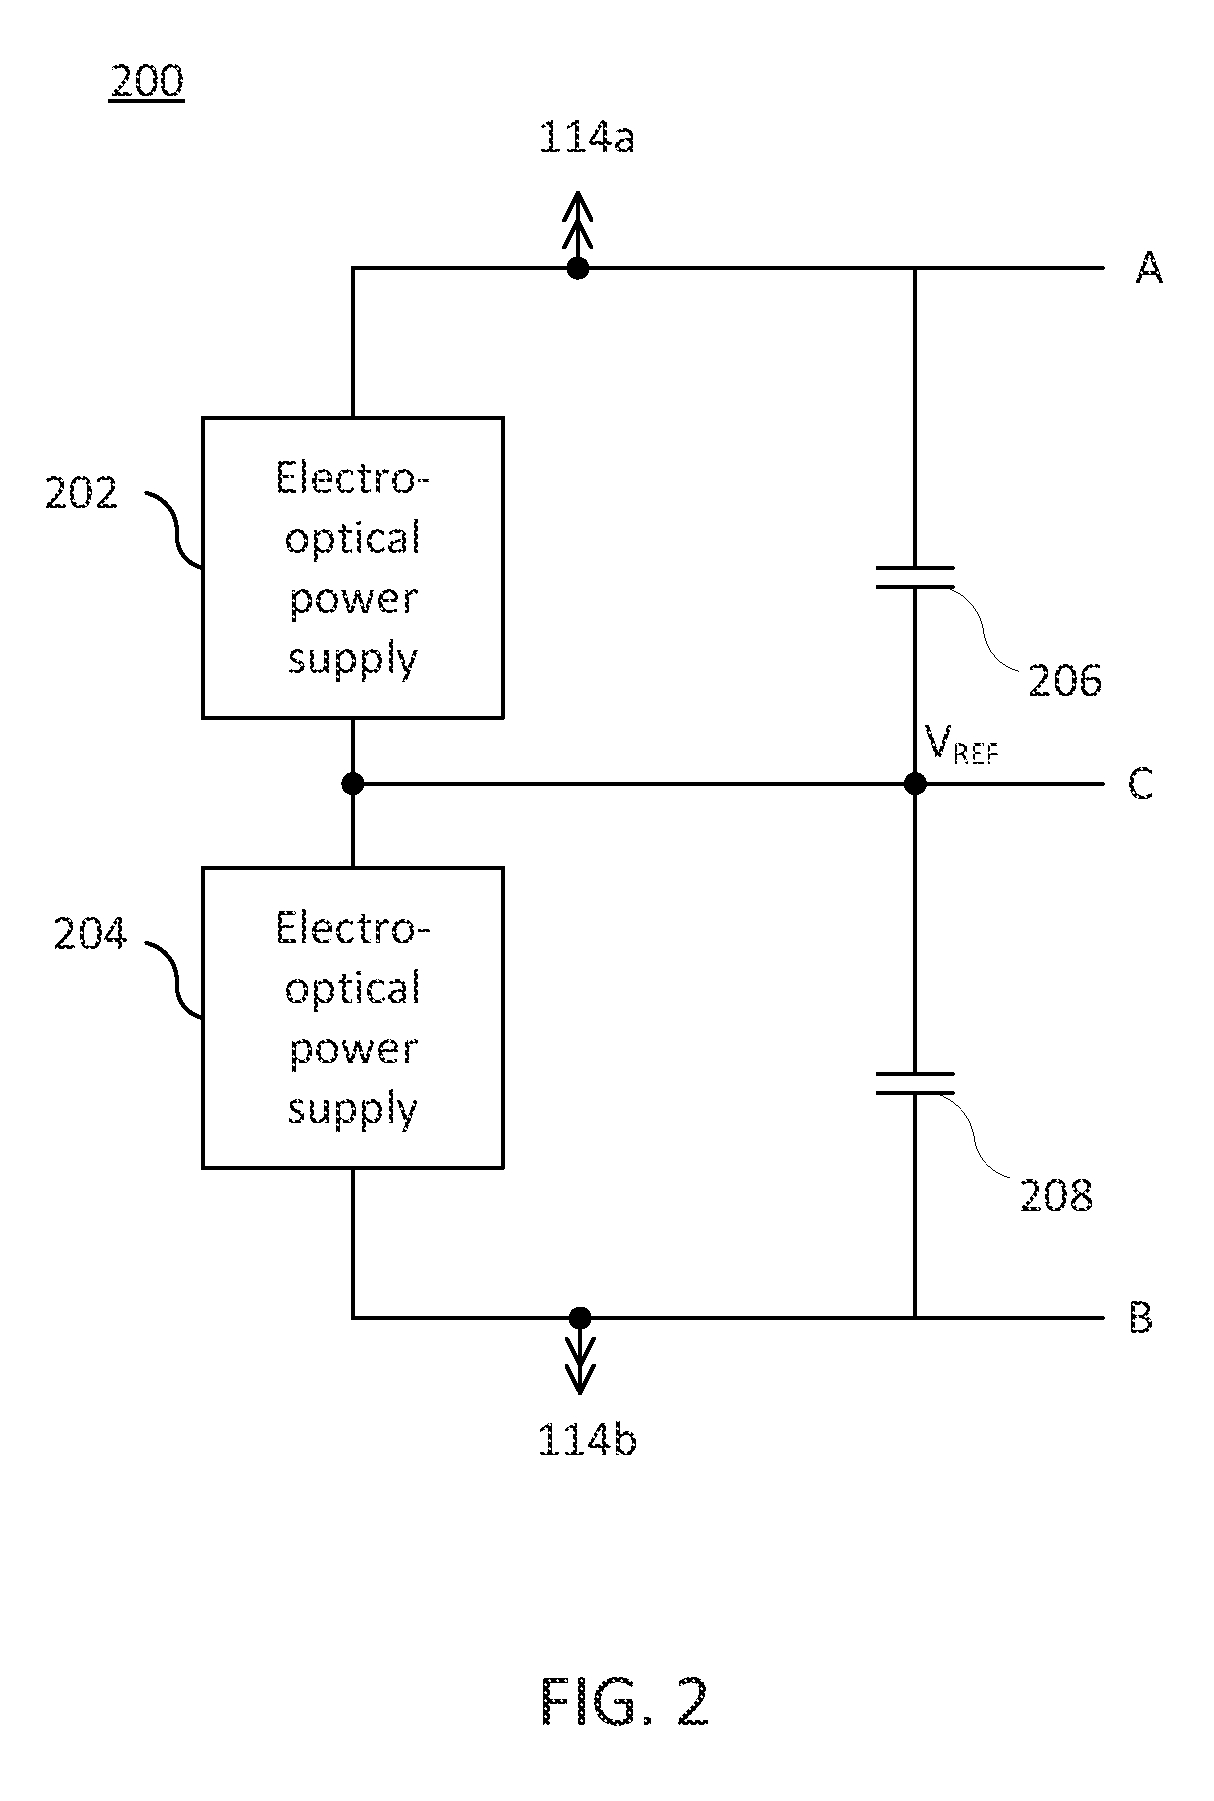 Solid state relay circuit